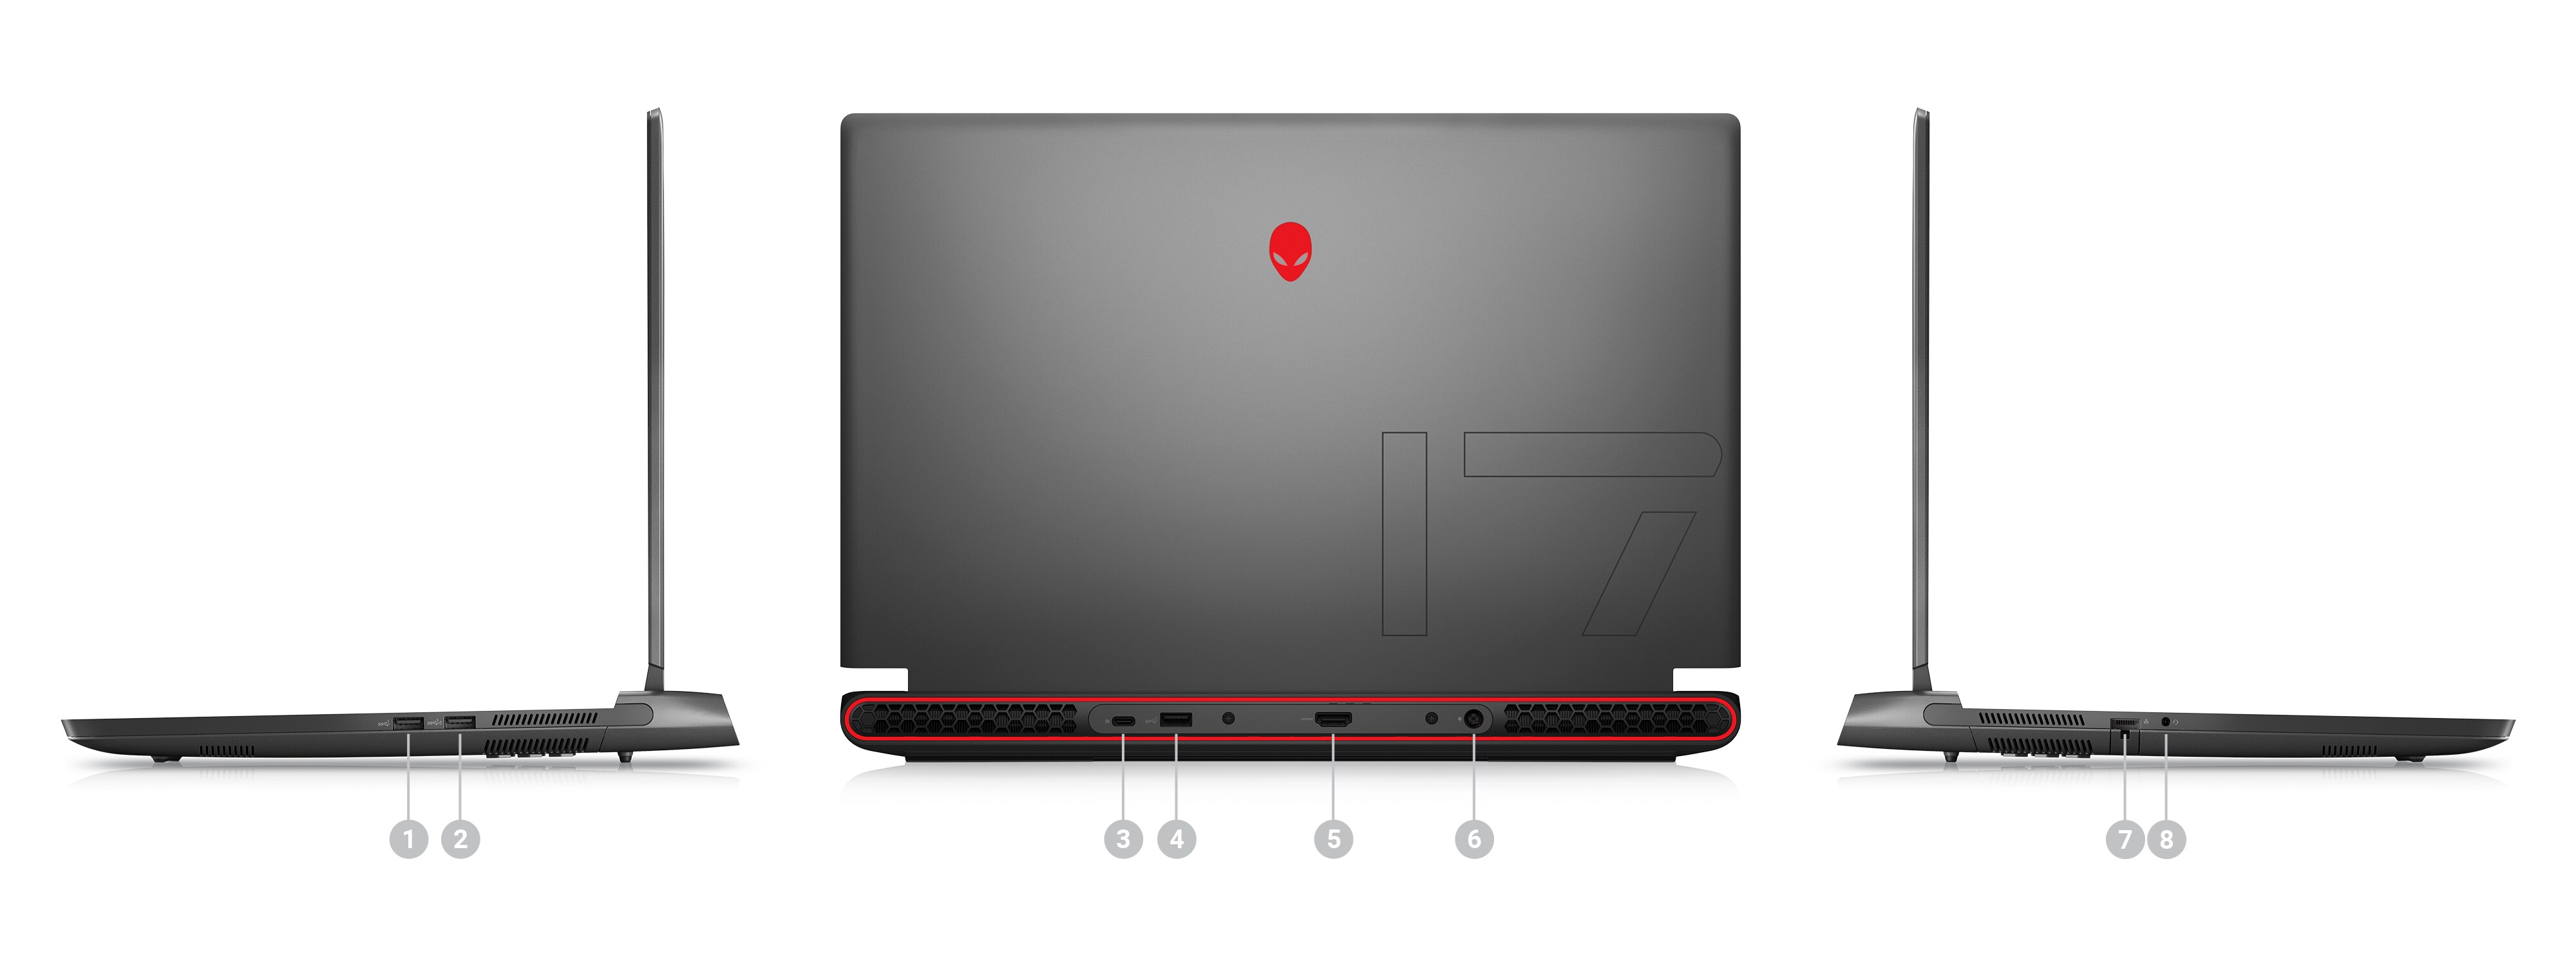 Picture of three Dell Alienware M17 R5 Gaming Laptops with numbers from 1 to 8 signaling product ports and slots.